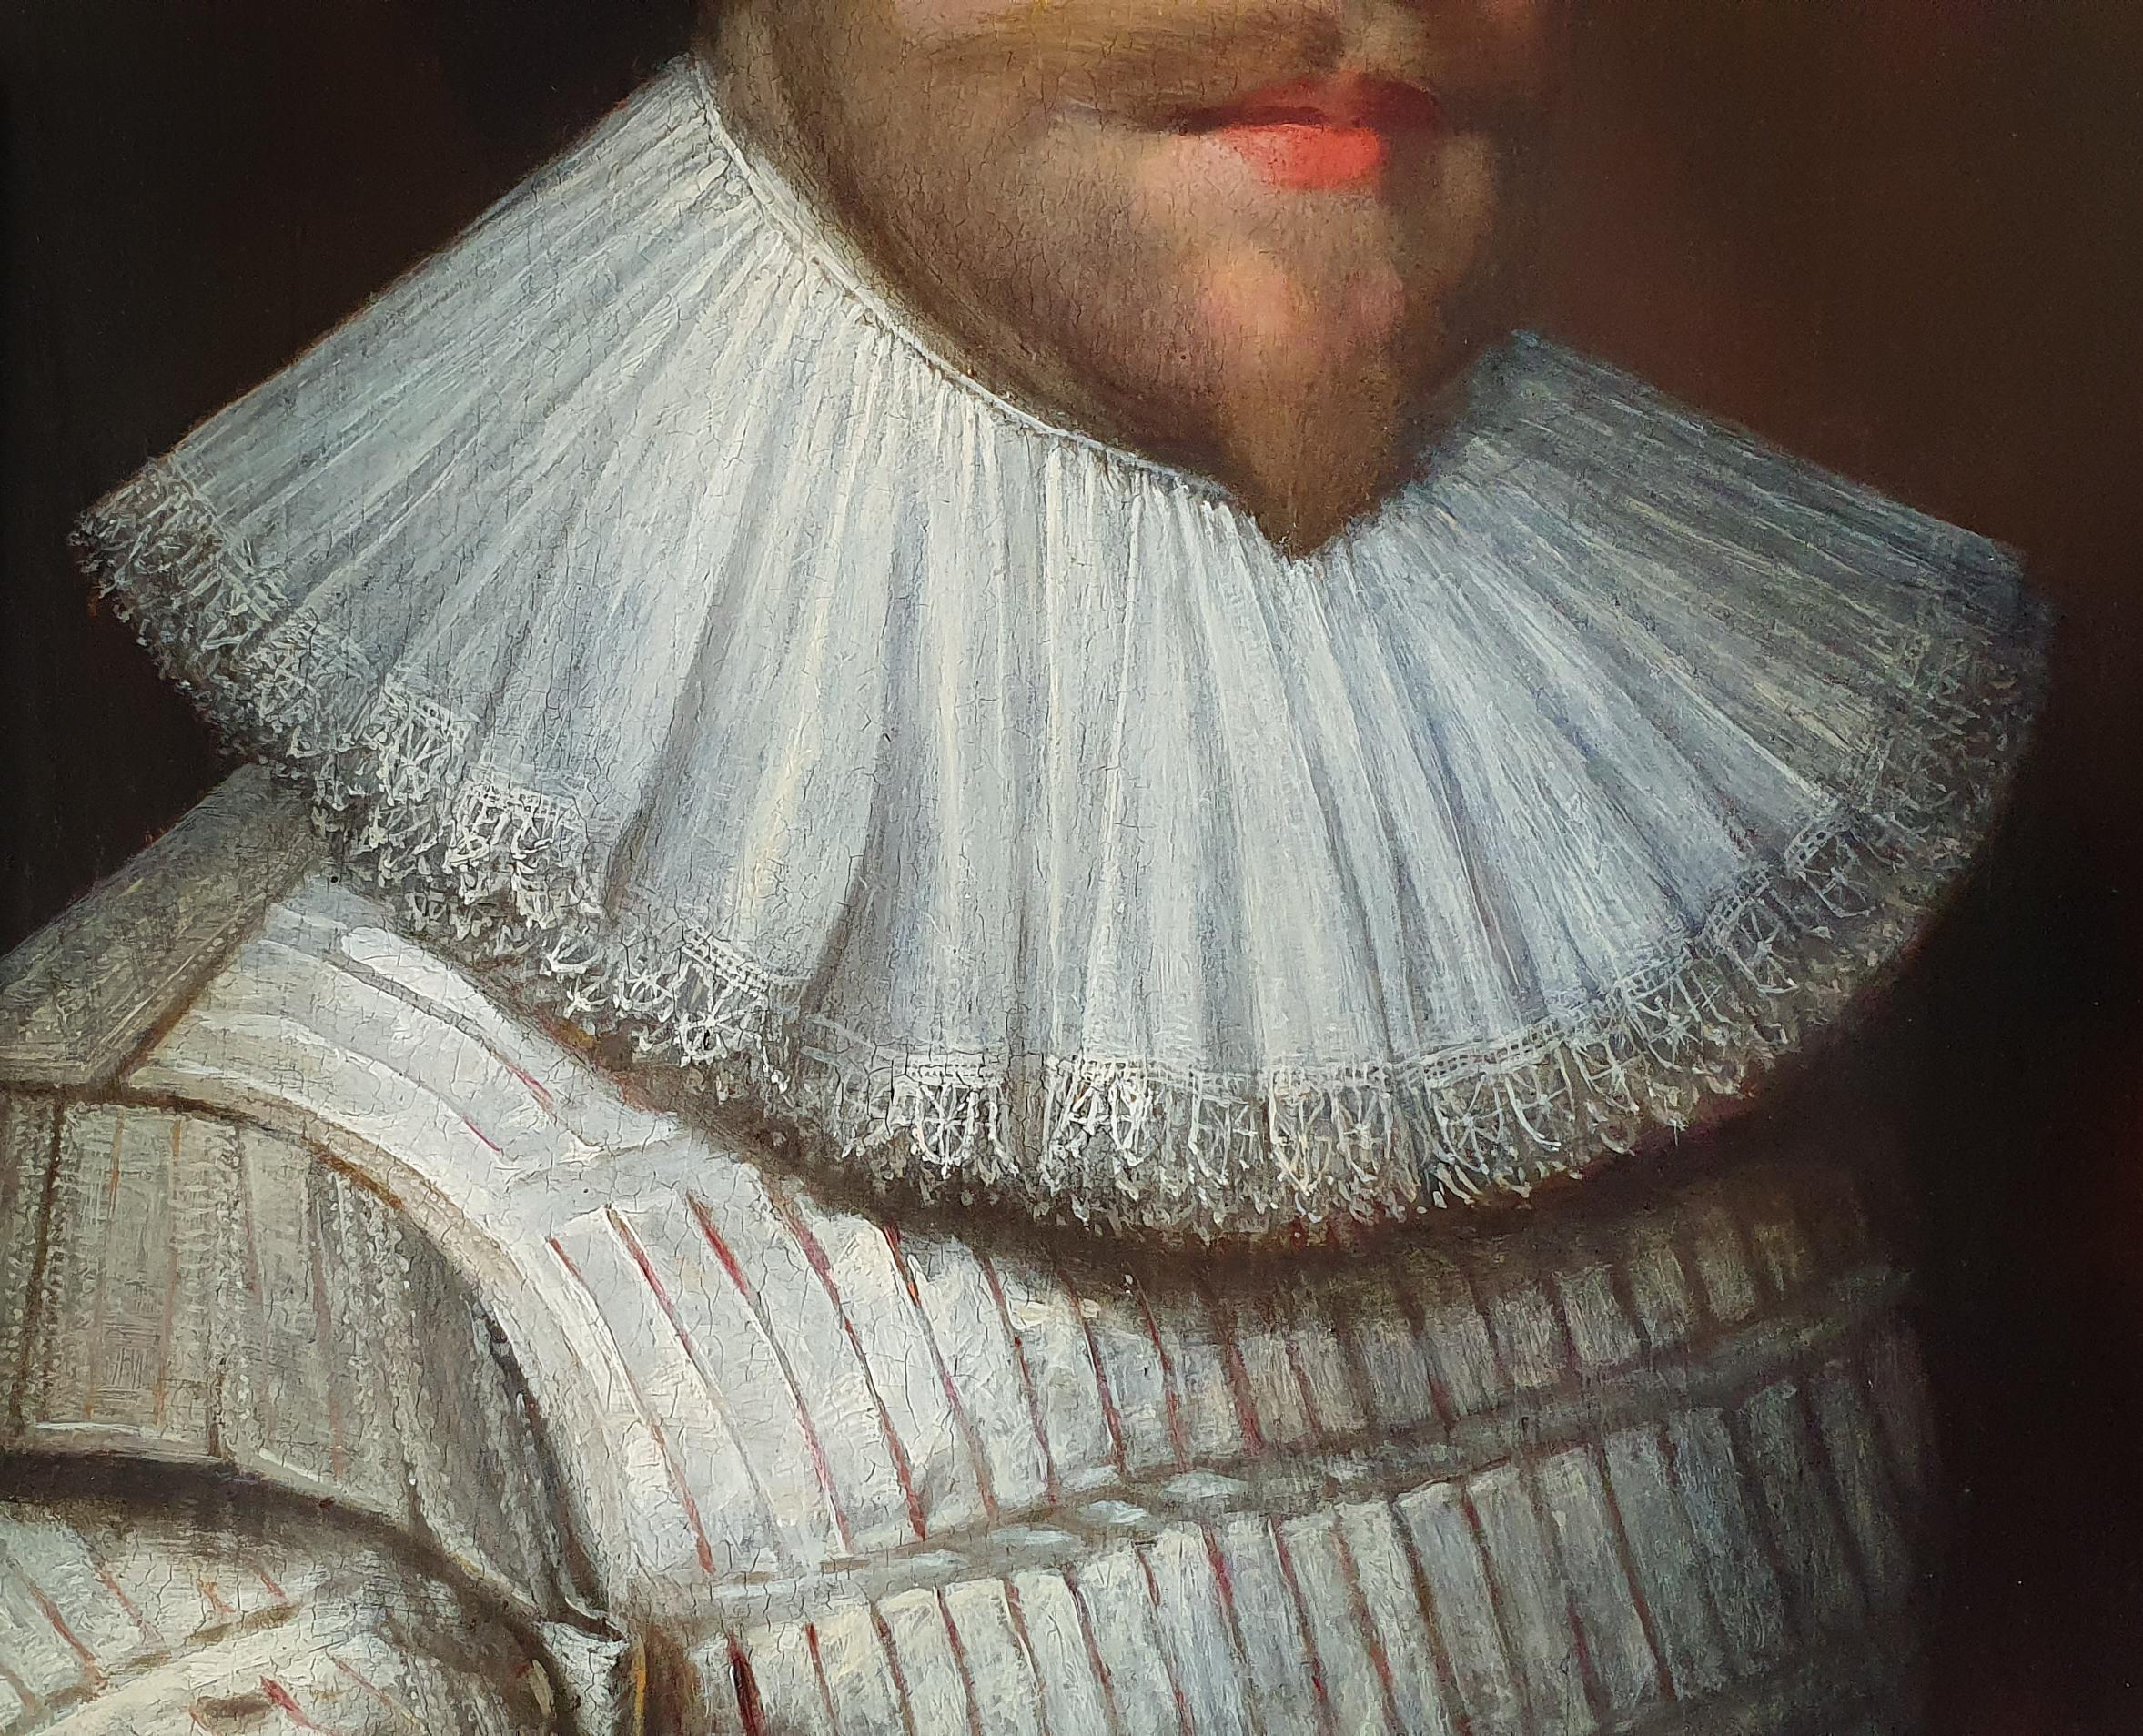 Portrait of a Gentleman in a White Slashed Doublet c.1620
Attributed to Cornelius Johnson (1593-1661)

This exquisite portrait, presented by Titan Fine Art, is thought to have been in the collection of Edward Harley, 2nd Earl of Oxford (1689-1741),